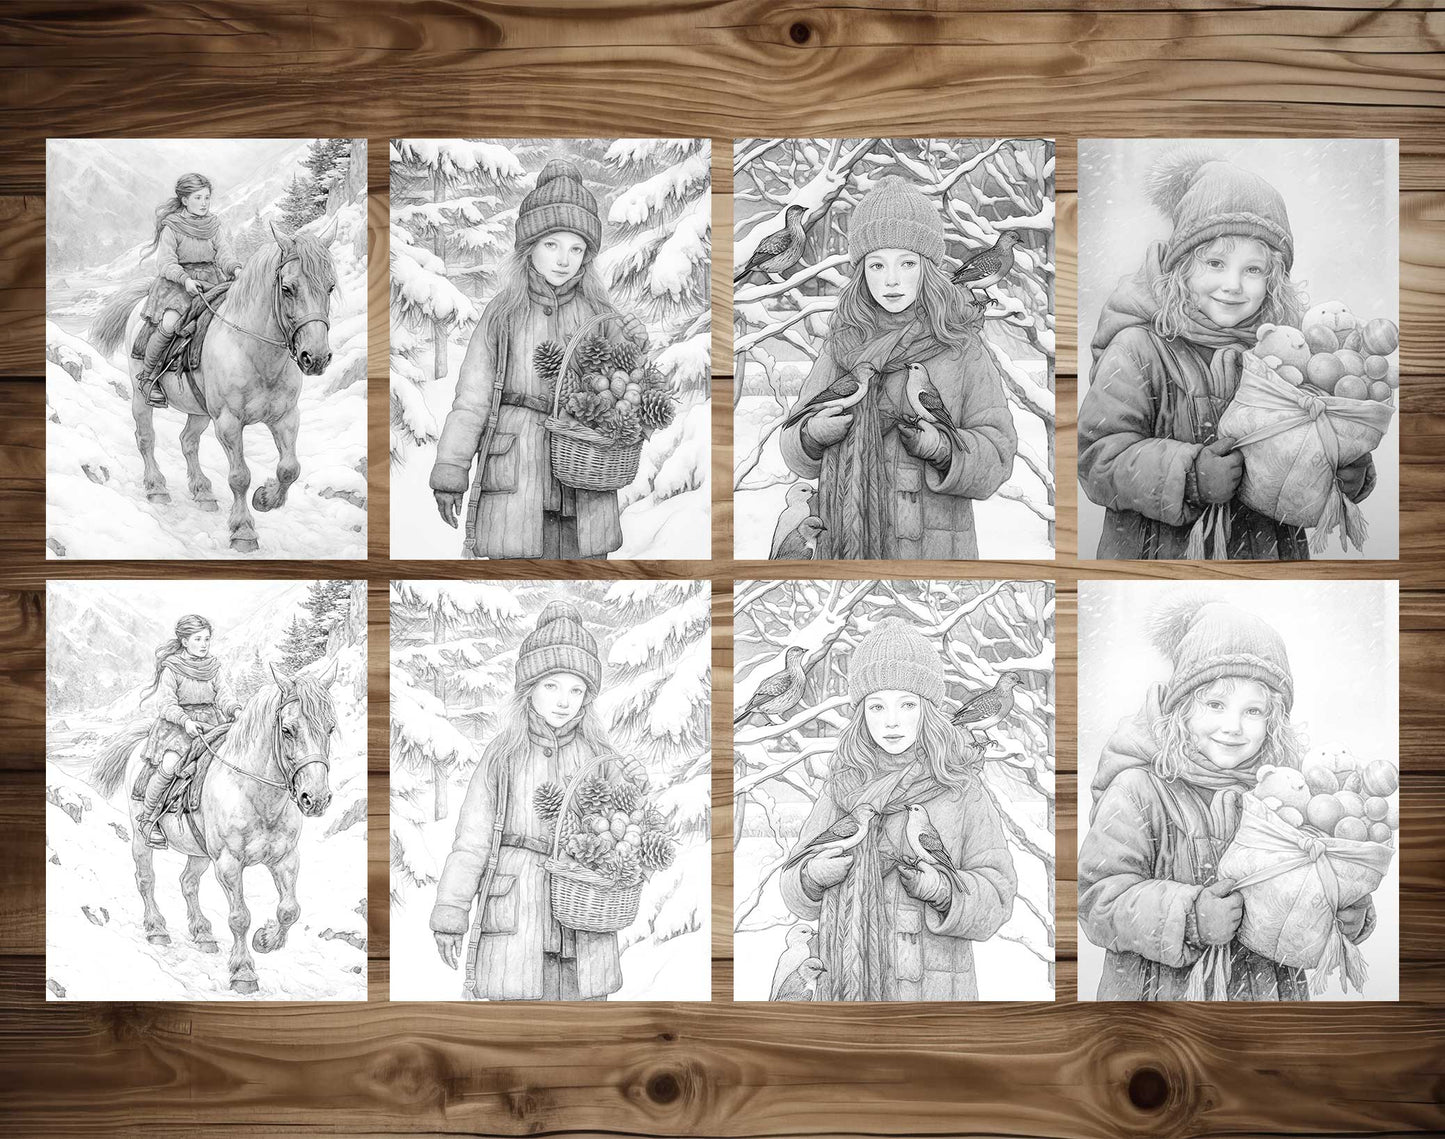 25 Winter Girls Grayscale Coloring Pages - Instant Download - Printable PDF Dark/Light